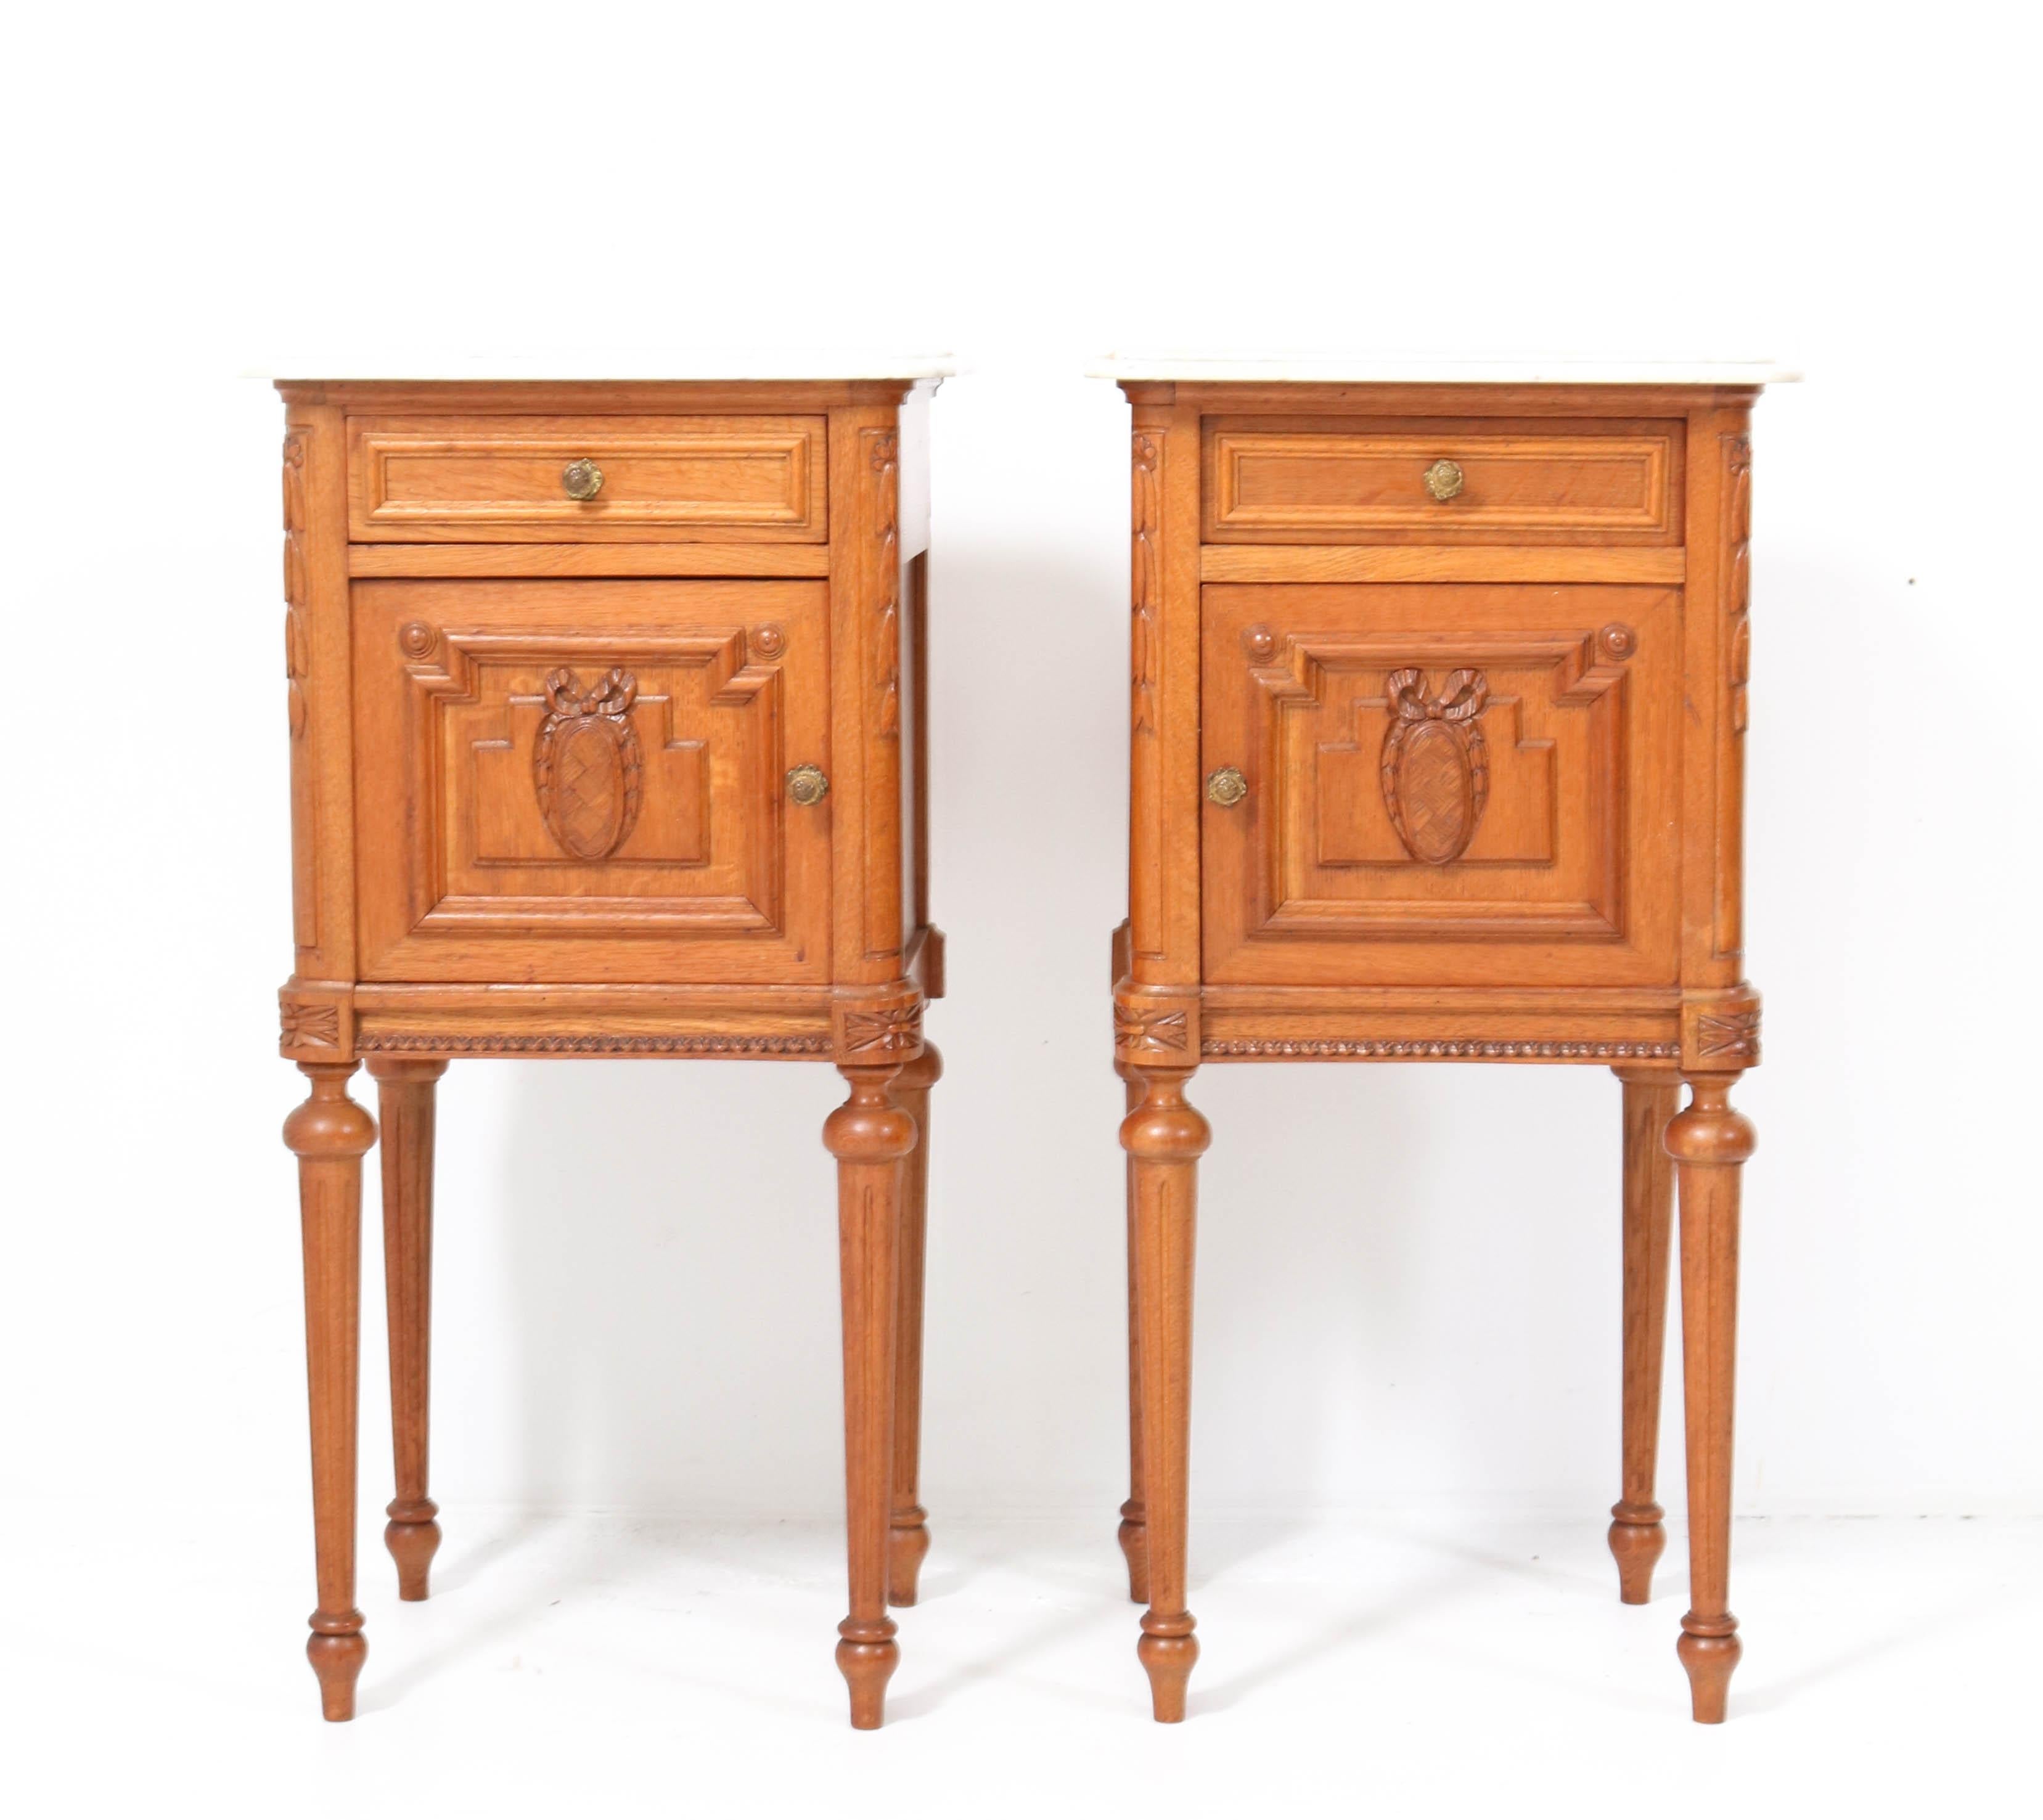 Stunning pair of Art Nouveau nightstands or bedside tables.
Striking French design from the 1900s.
Solid oak with original brass knobs on doors and drawers.
Original marble tops,please note one top has been broken but has been
professionally